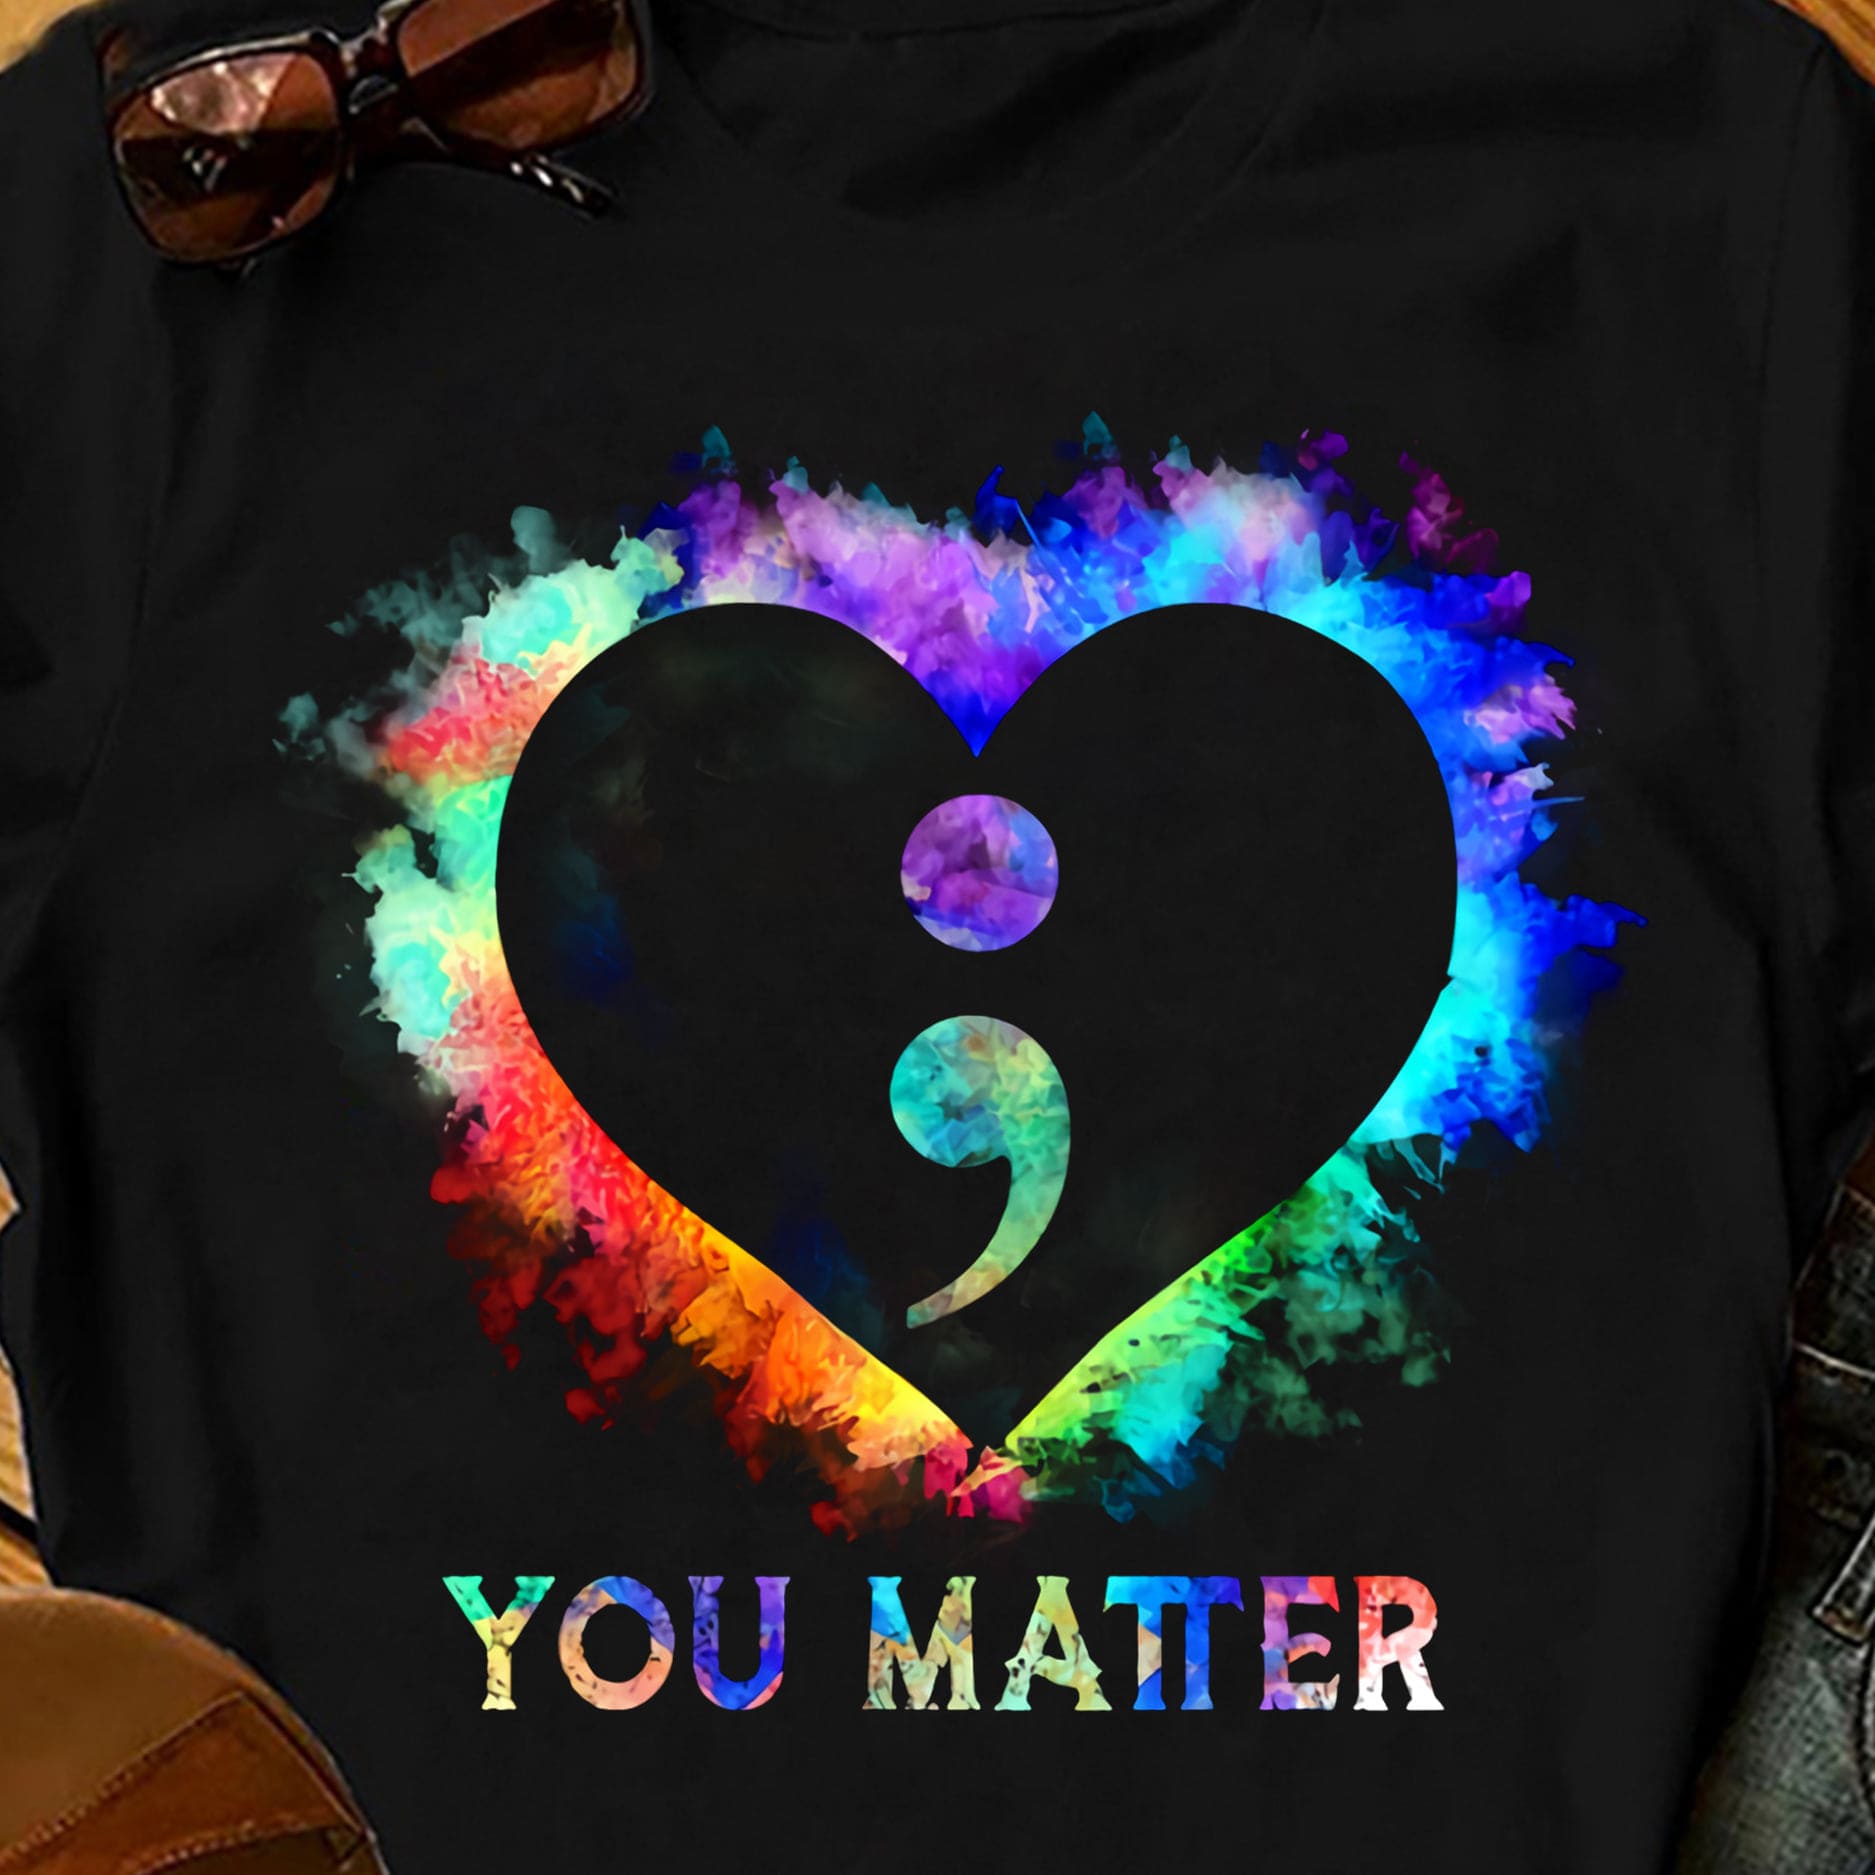 You matter, your life matters - Suicide prevention awareness T-shirt